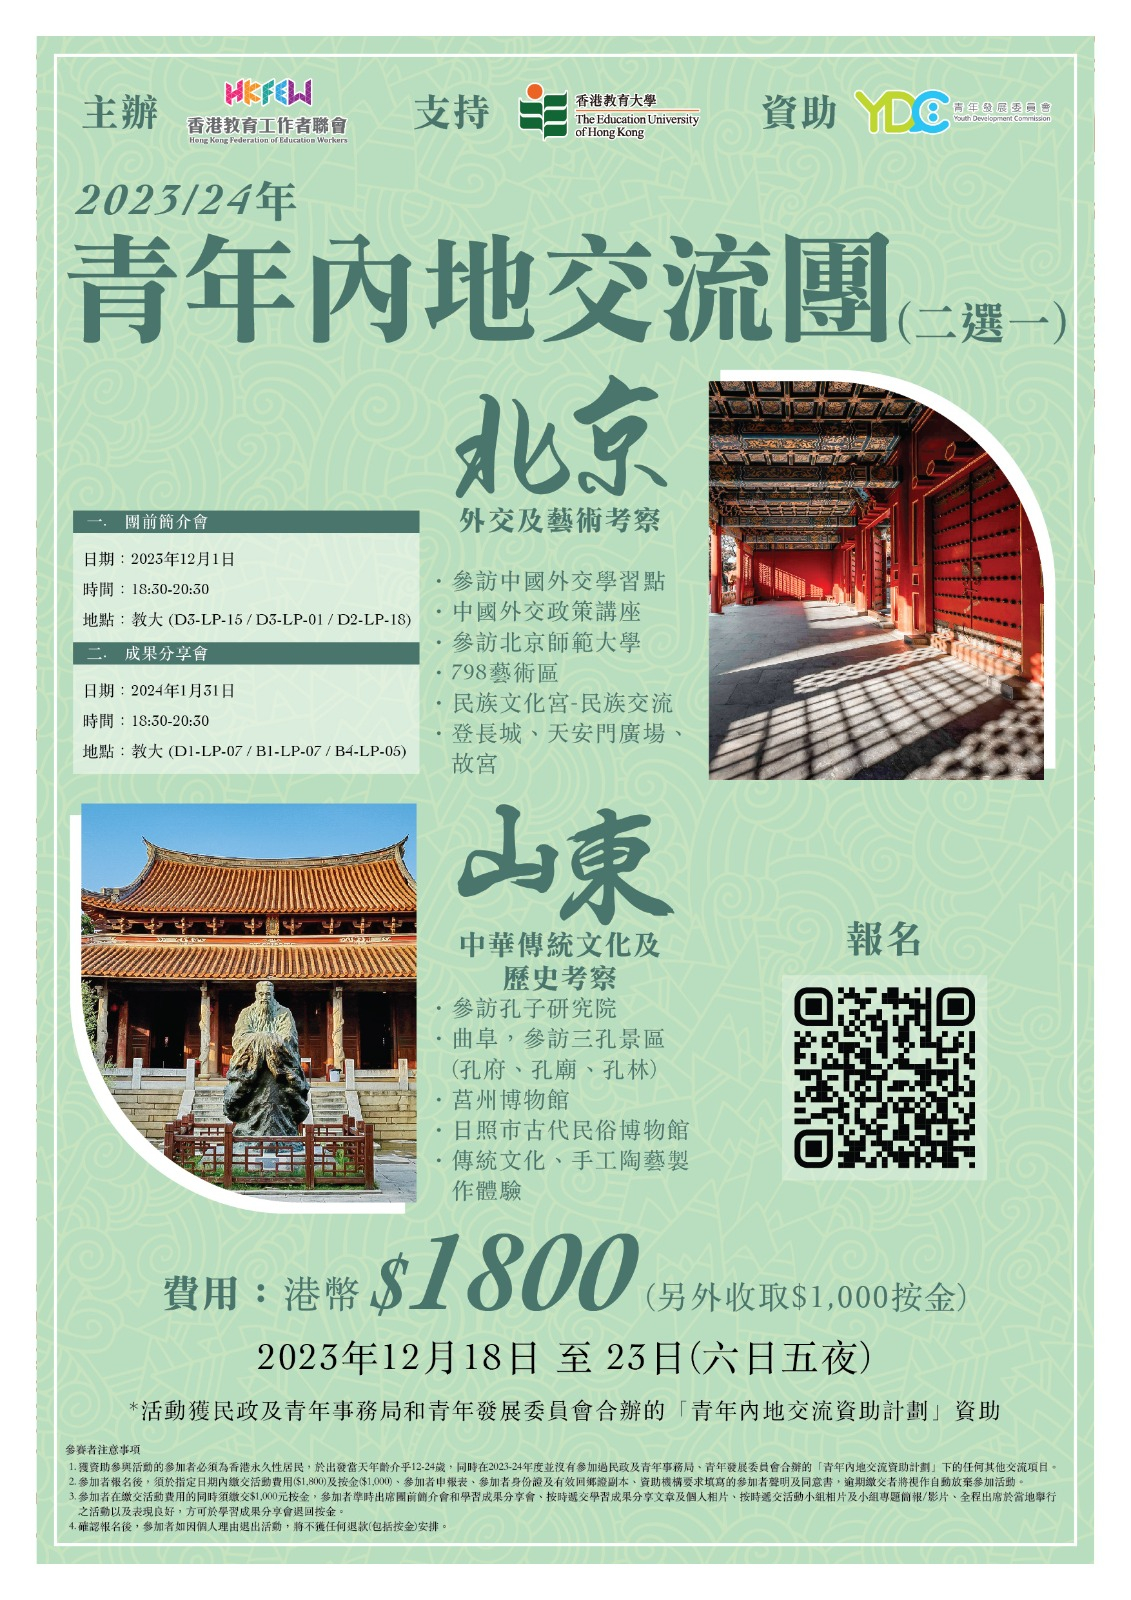 Public Photos / Files - Global Collaboration in Beijing and Shandong Poster